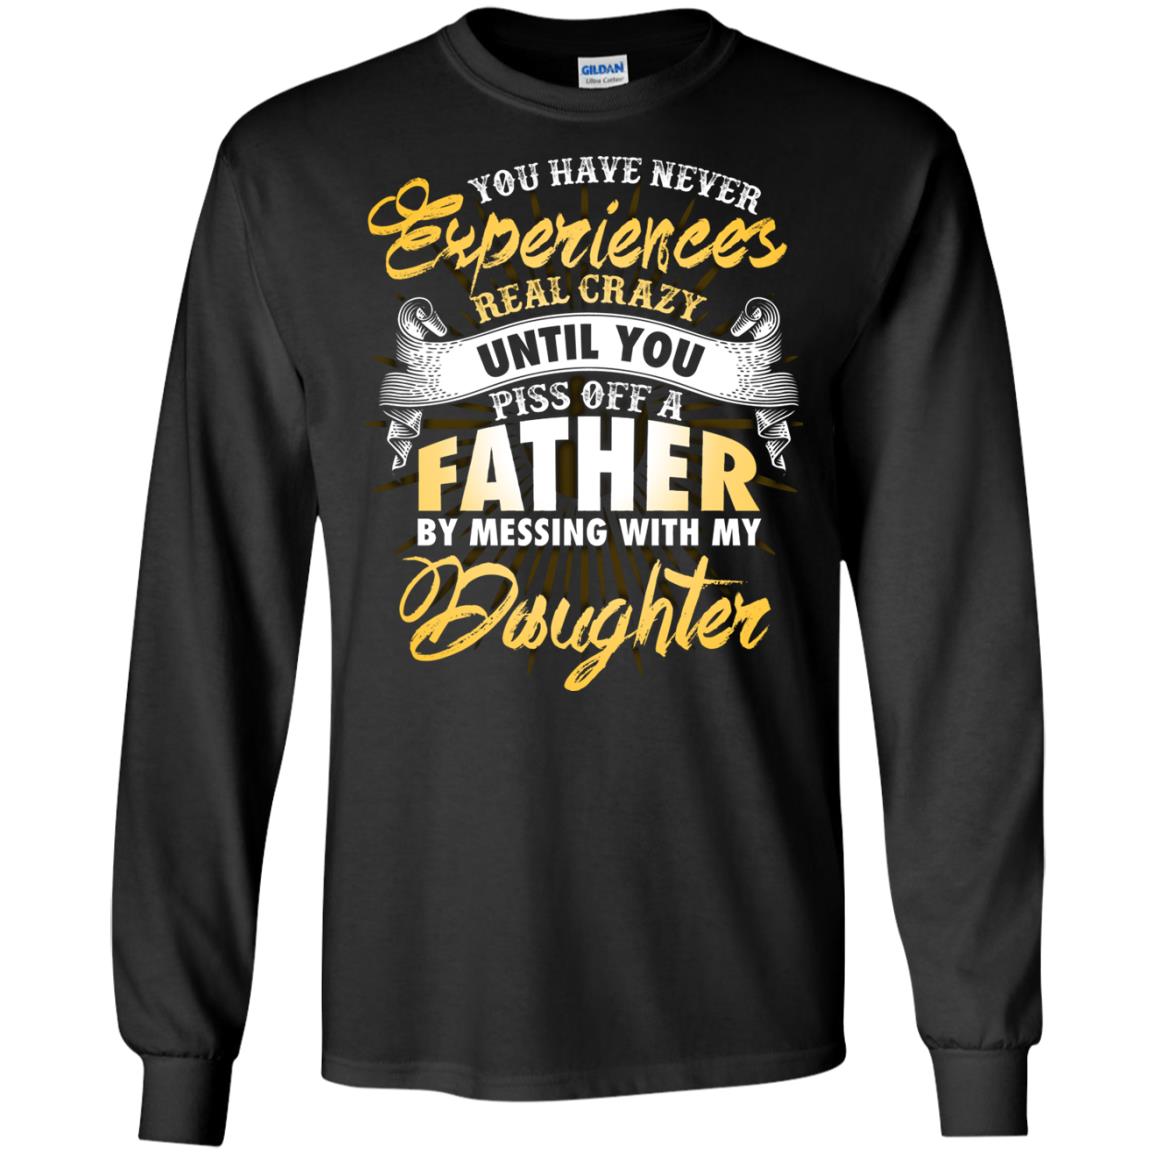 You Have Never Experiences Real Crazy Until You Piss Off A Father By Messing With My DaughterG240 Gildan LS Ultra Cotton T-Shirt